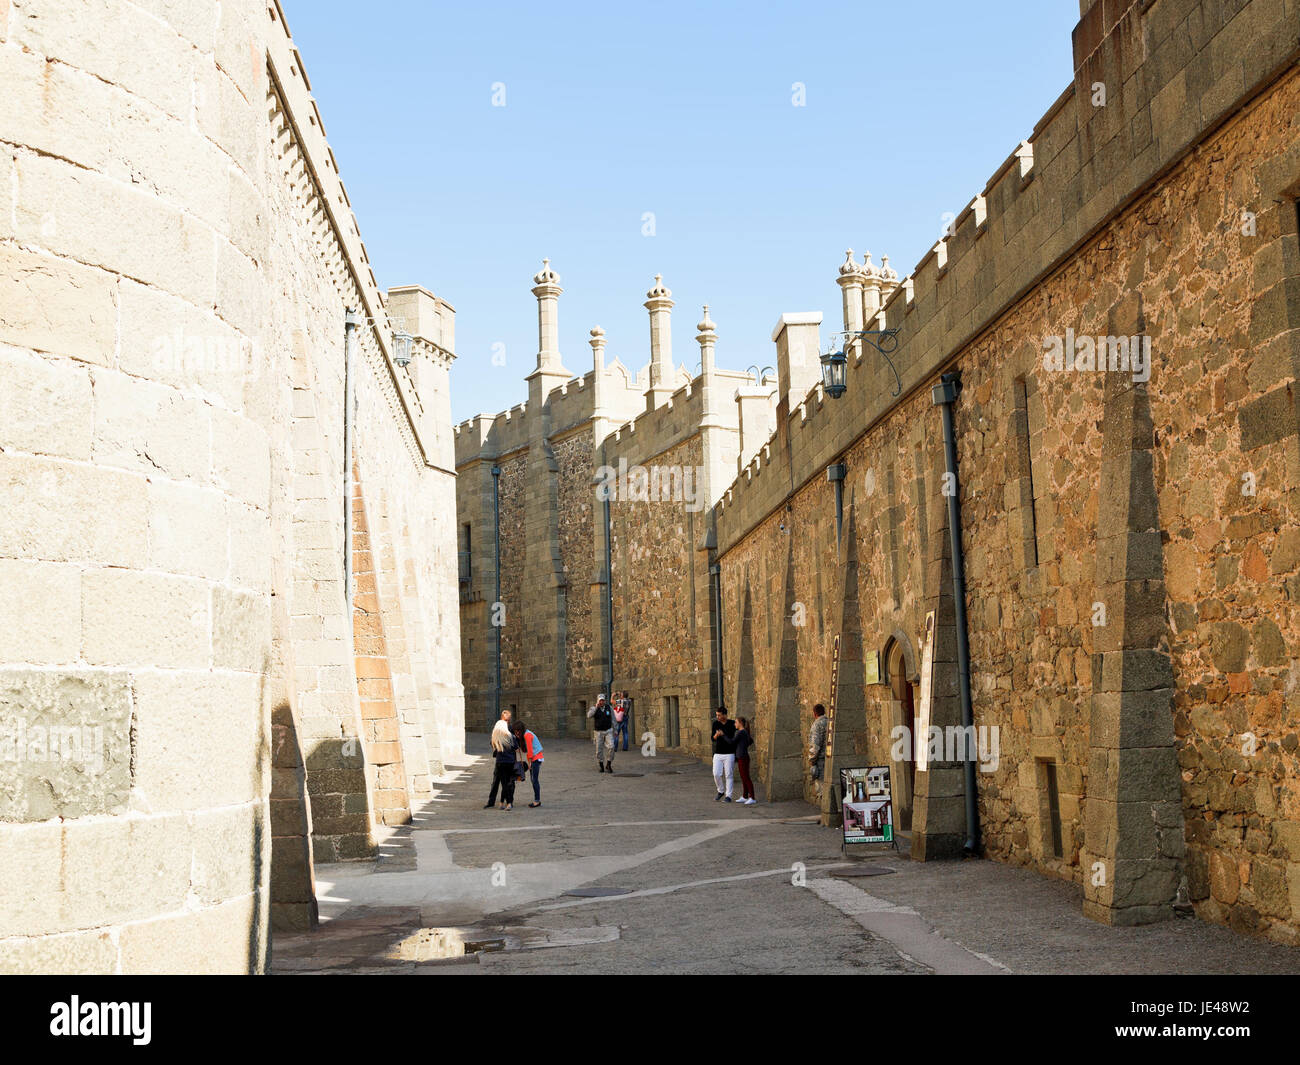 ALUPKA, RUSSIA - SEPTEMBER 28, 2014: tourists in Shuvalov Passage of Vorontsov (Alupka) Palace in Crimea. The palace was built in 1828-1848 for Prince Vorontsov for use as his summer residence Stock Photo